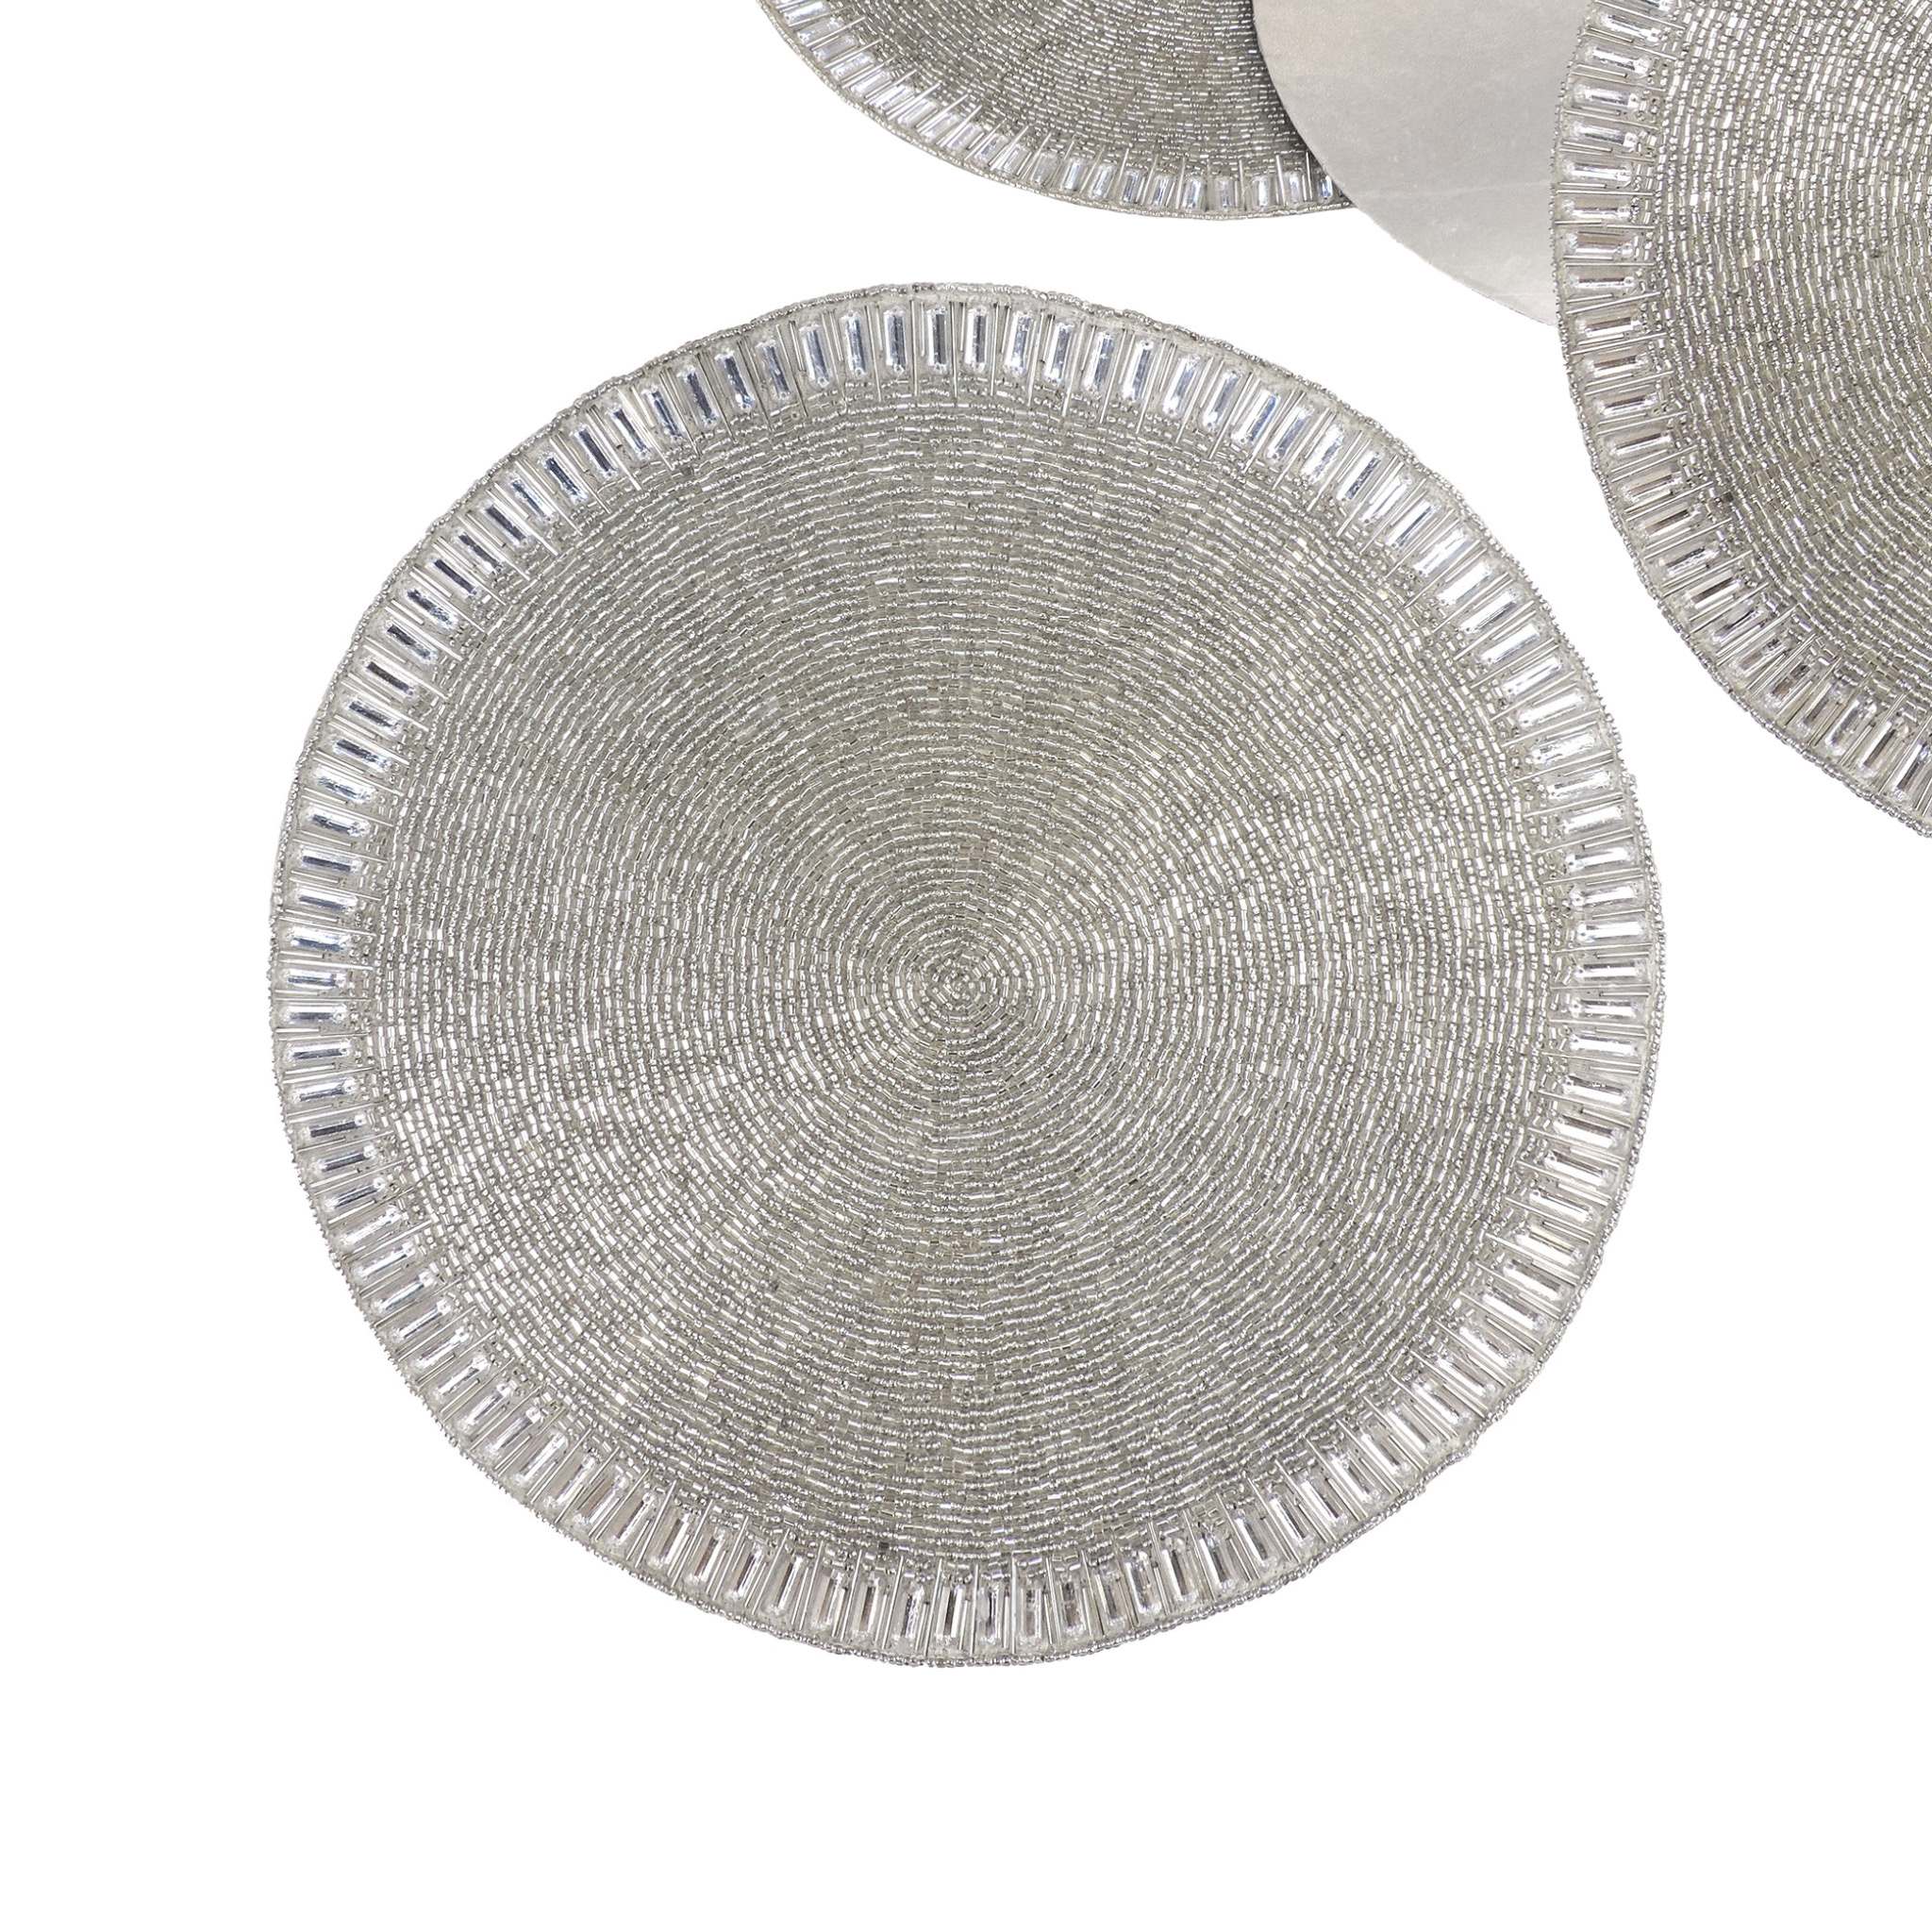 Glam Crystal Bead Embroidered Placemat in Cream Silver, Set of 2/4